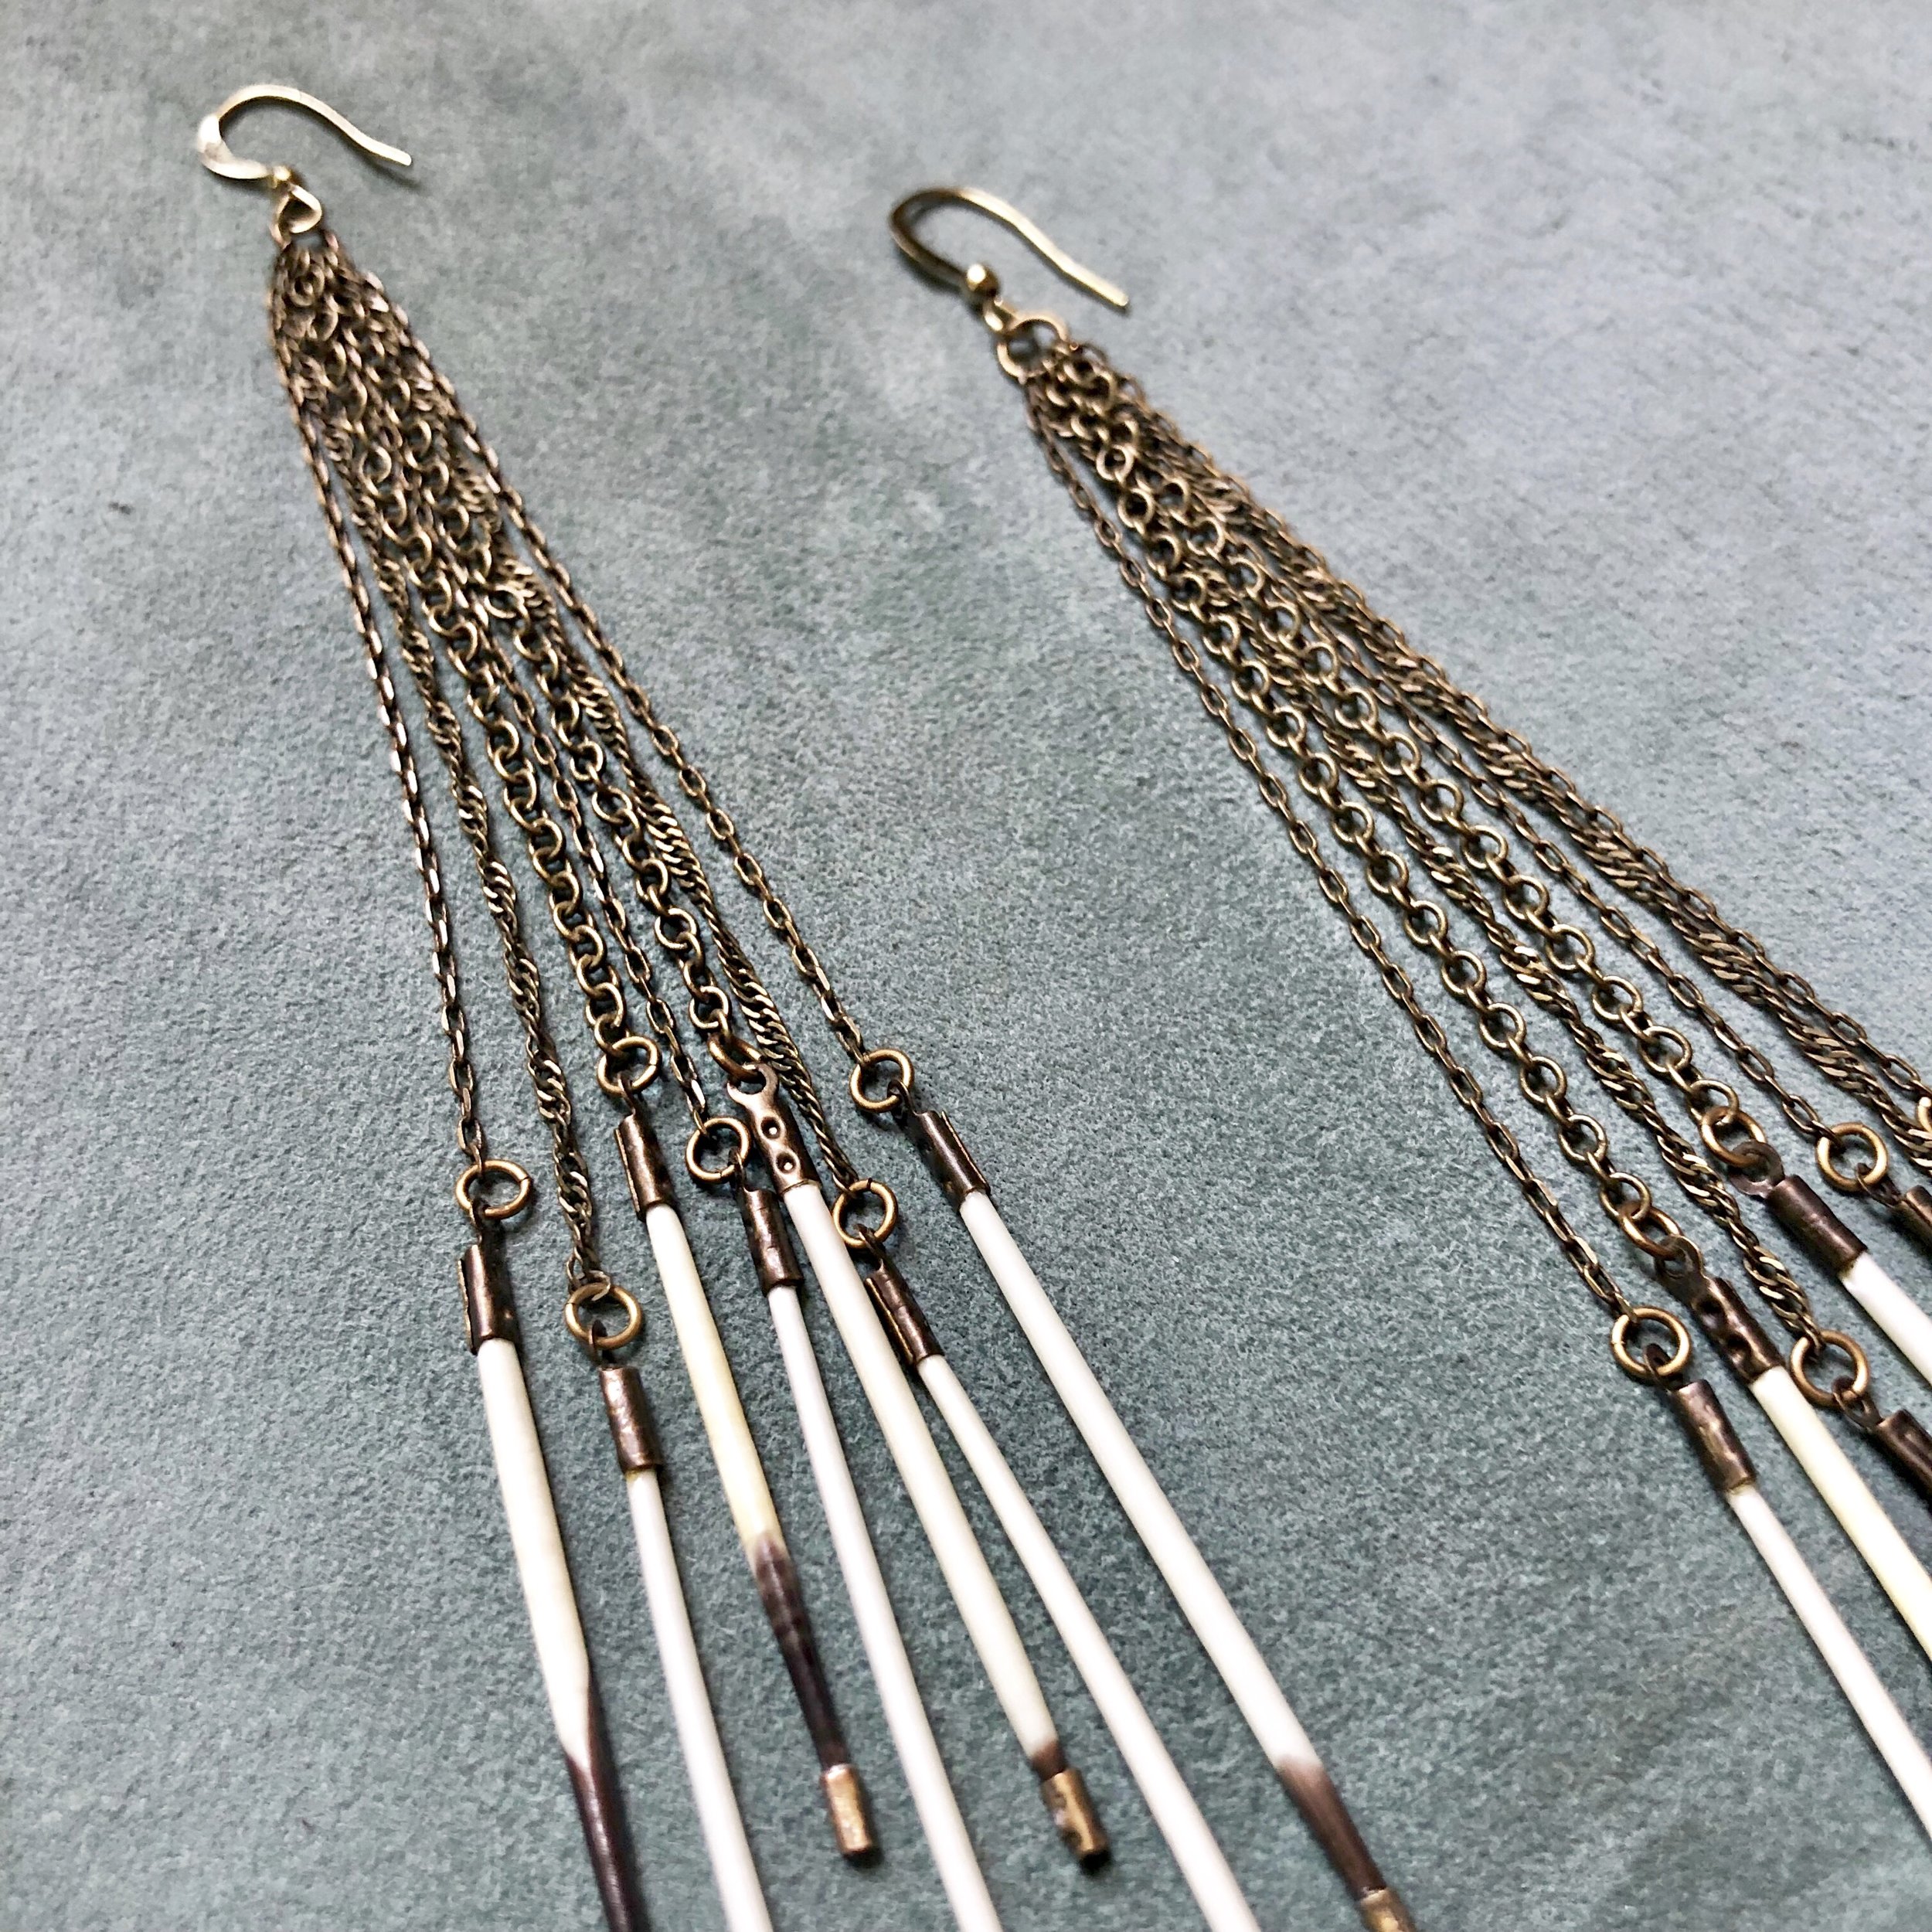 Triple The Trouble Black Porcupine Quills Earrings Available in Silver or Gold